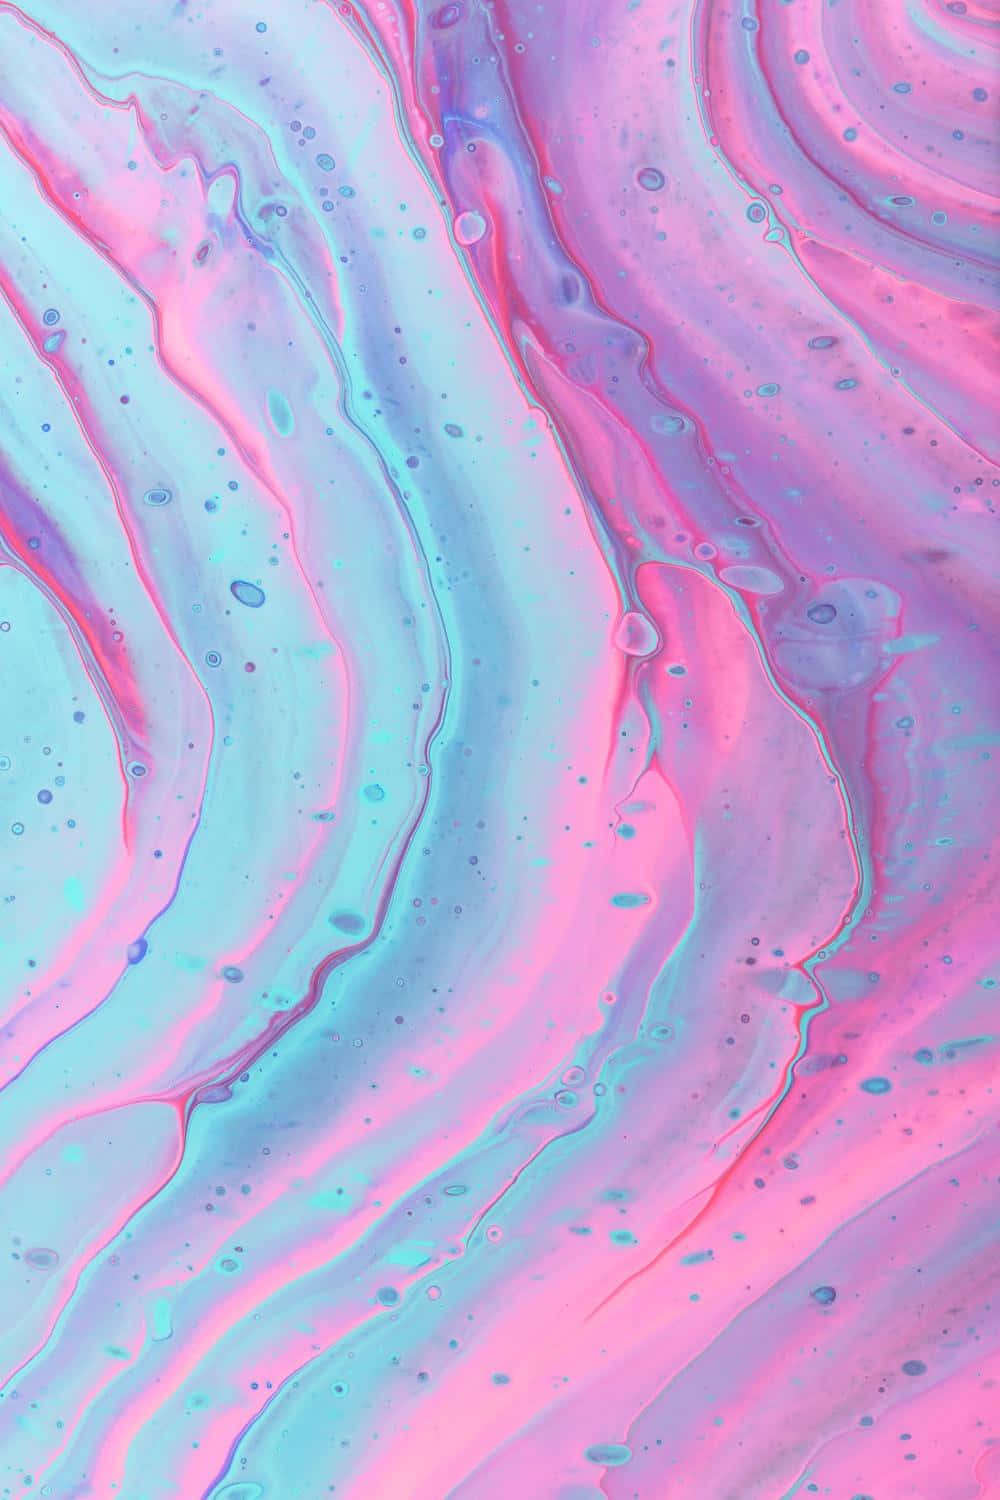 A Pink And Blue Liquid With Swirls